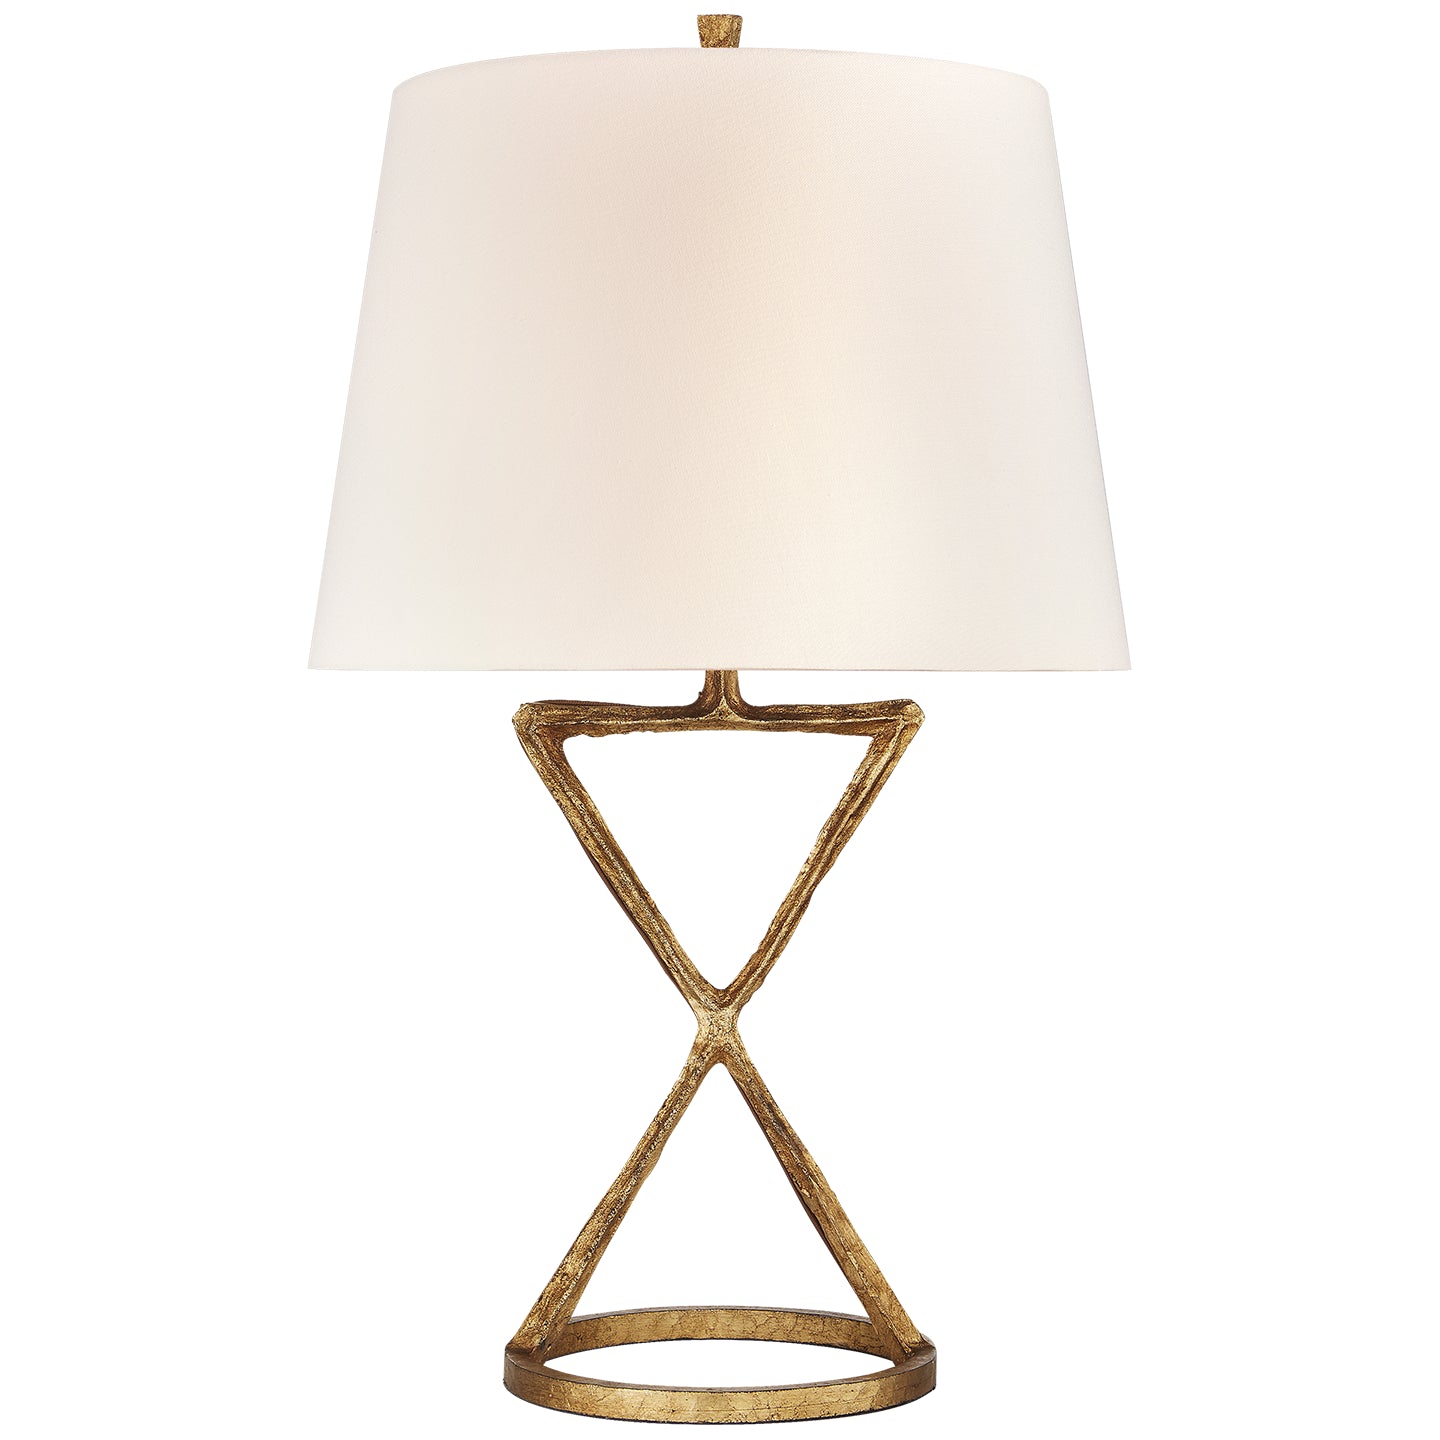 Load image into Gallery viewer, Visual Comfort Signature - S 3715GI-L - One Light Table Lamp - Anneu - Gilded Iron
